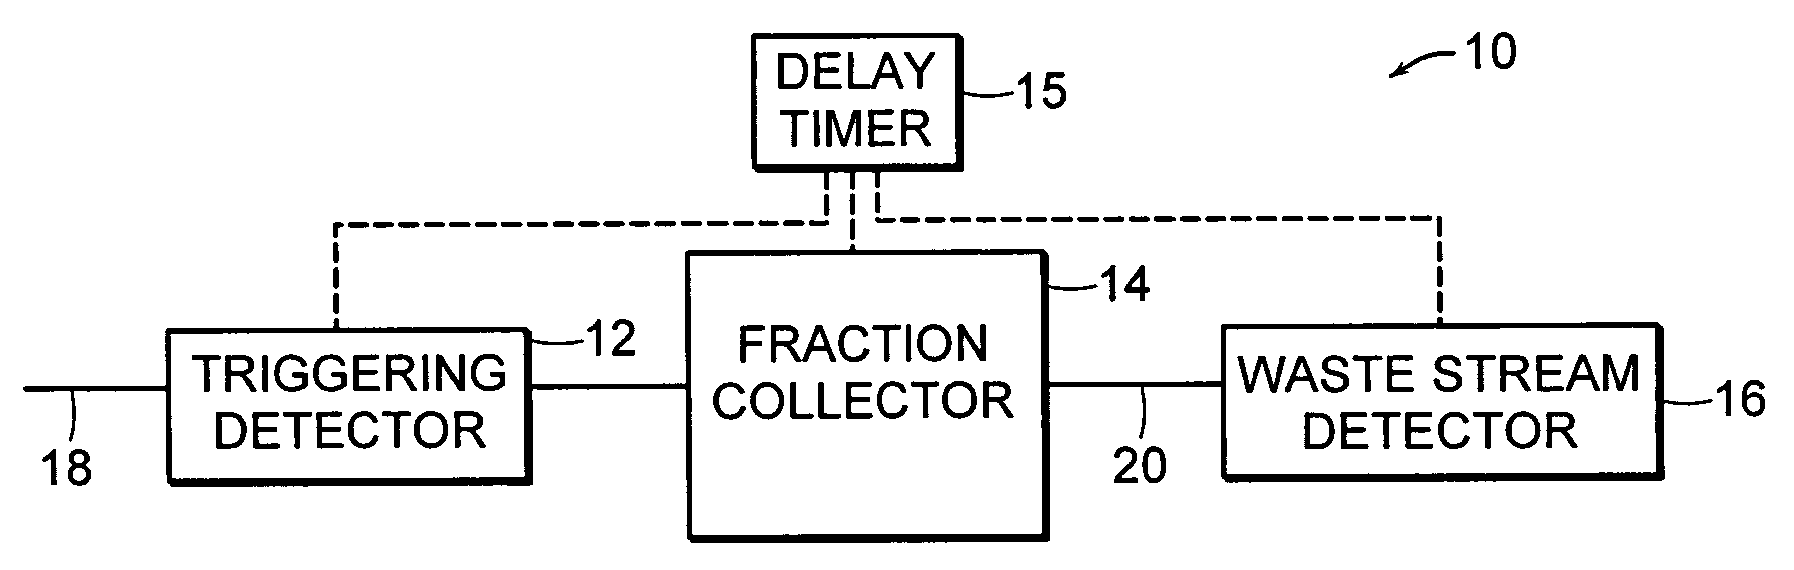 Fraction collector for composition analysis